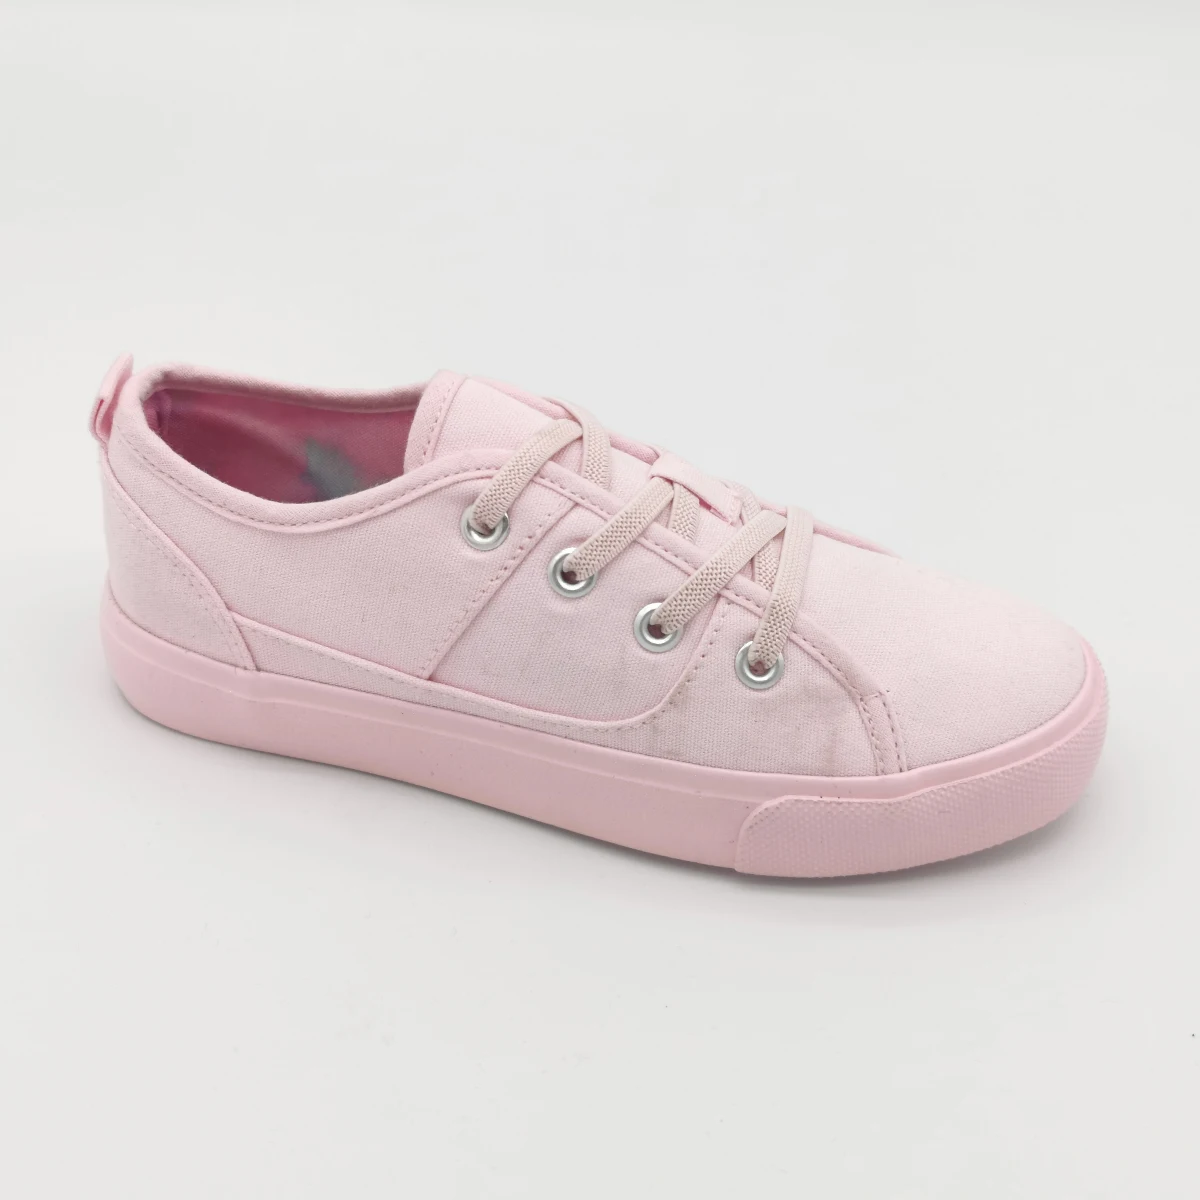 Classical Kids canvas shoes Comfortable children casual shoes Shcool shoes for Girls